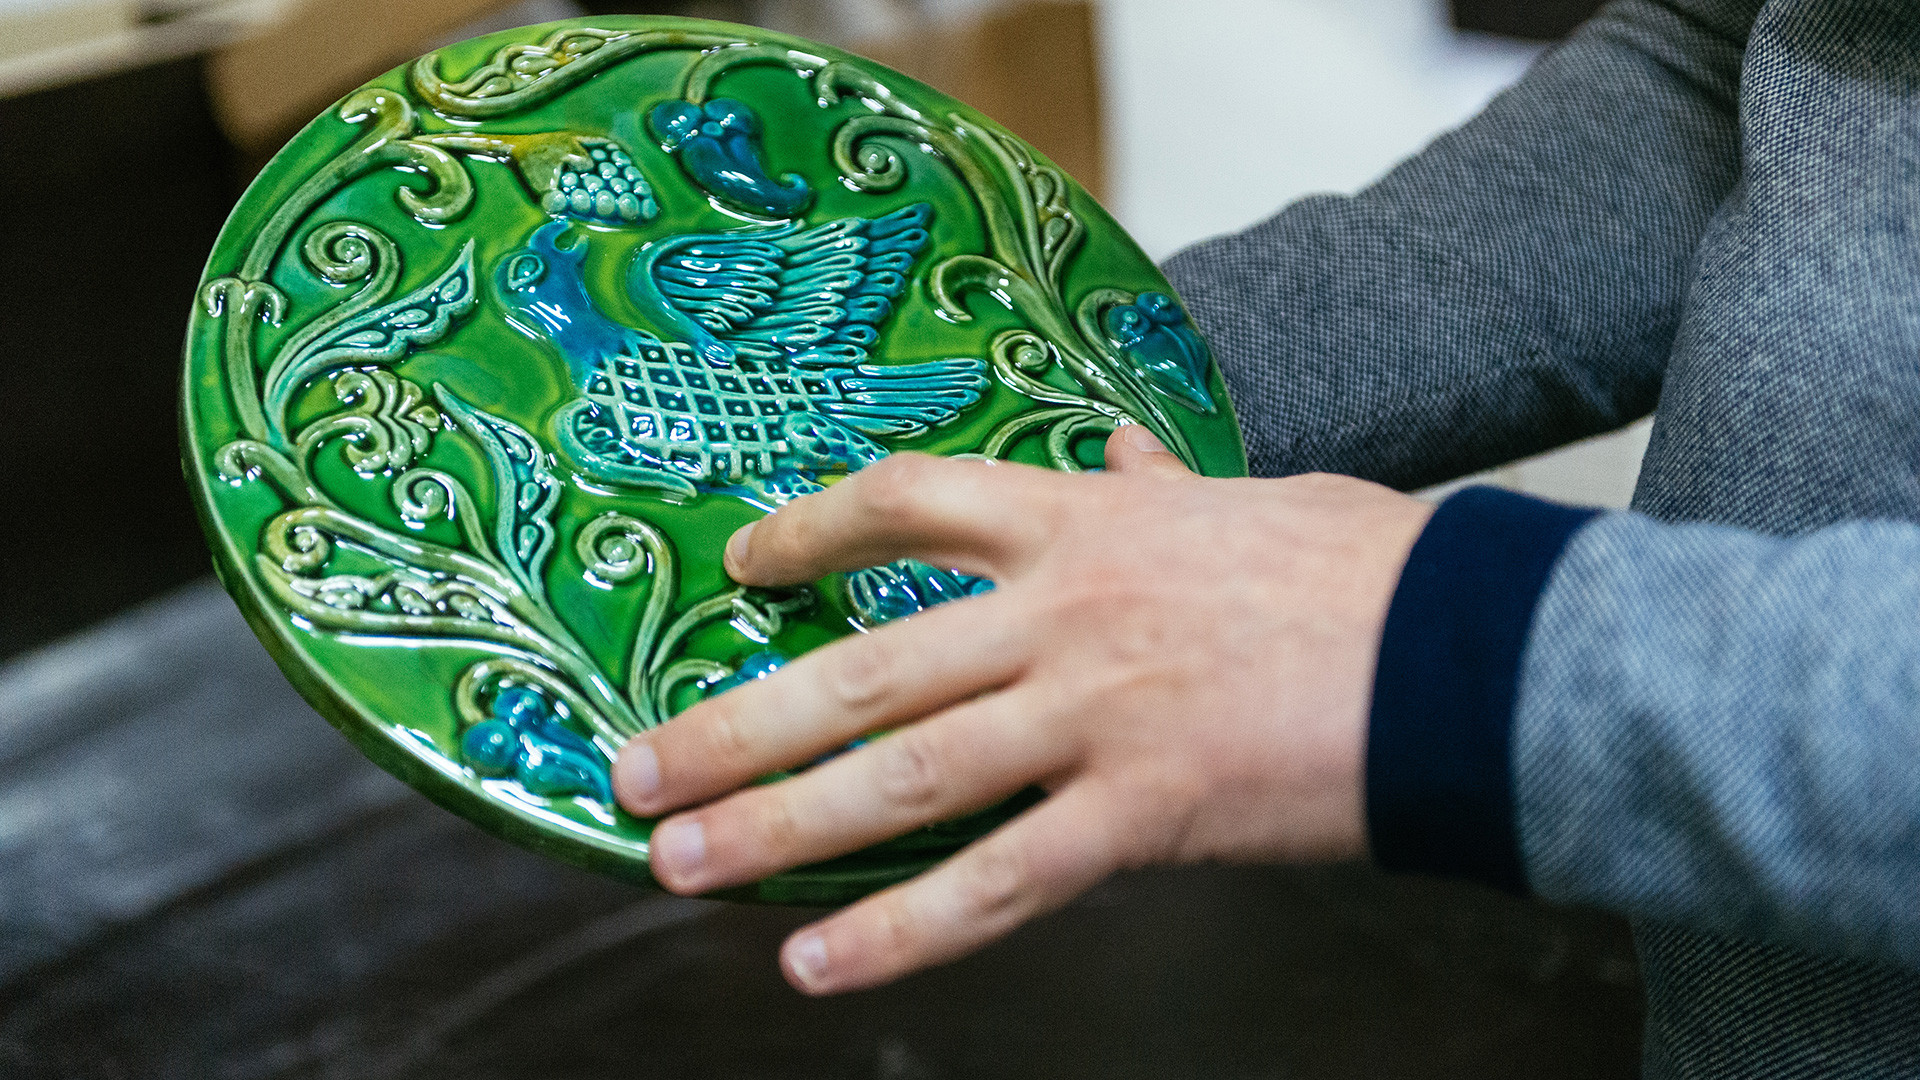 Muravleny izrazets made by CeramicaDecor, one of the Russian companies making souvenir tiles.